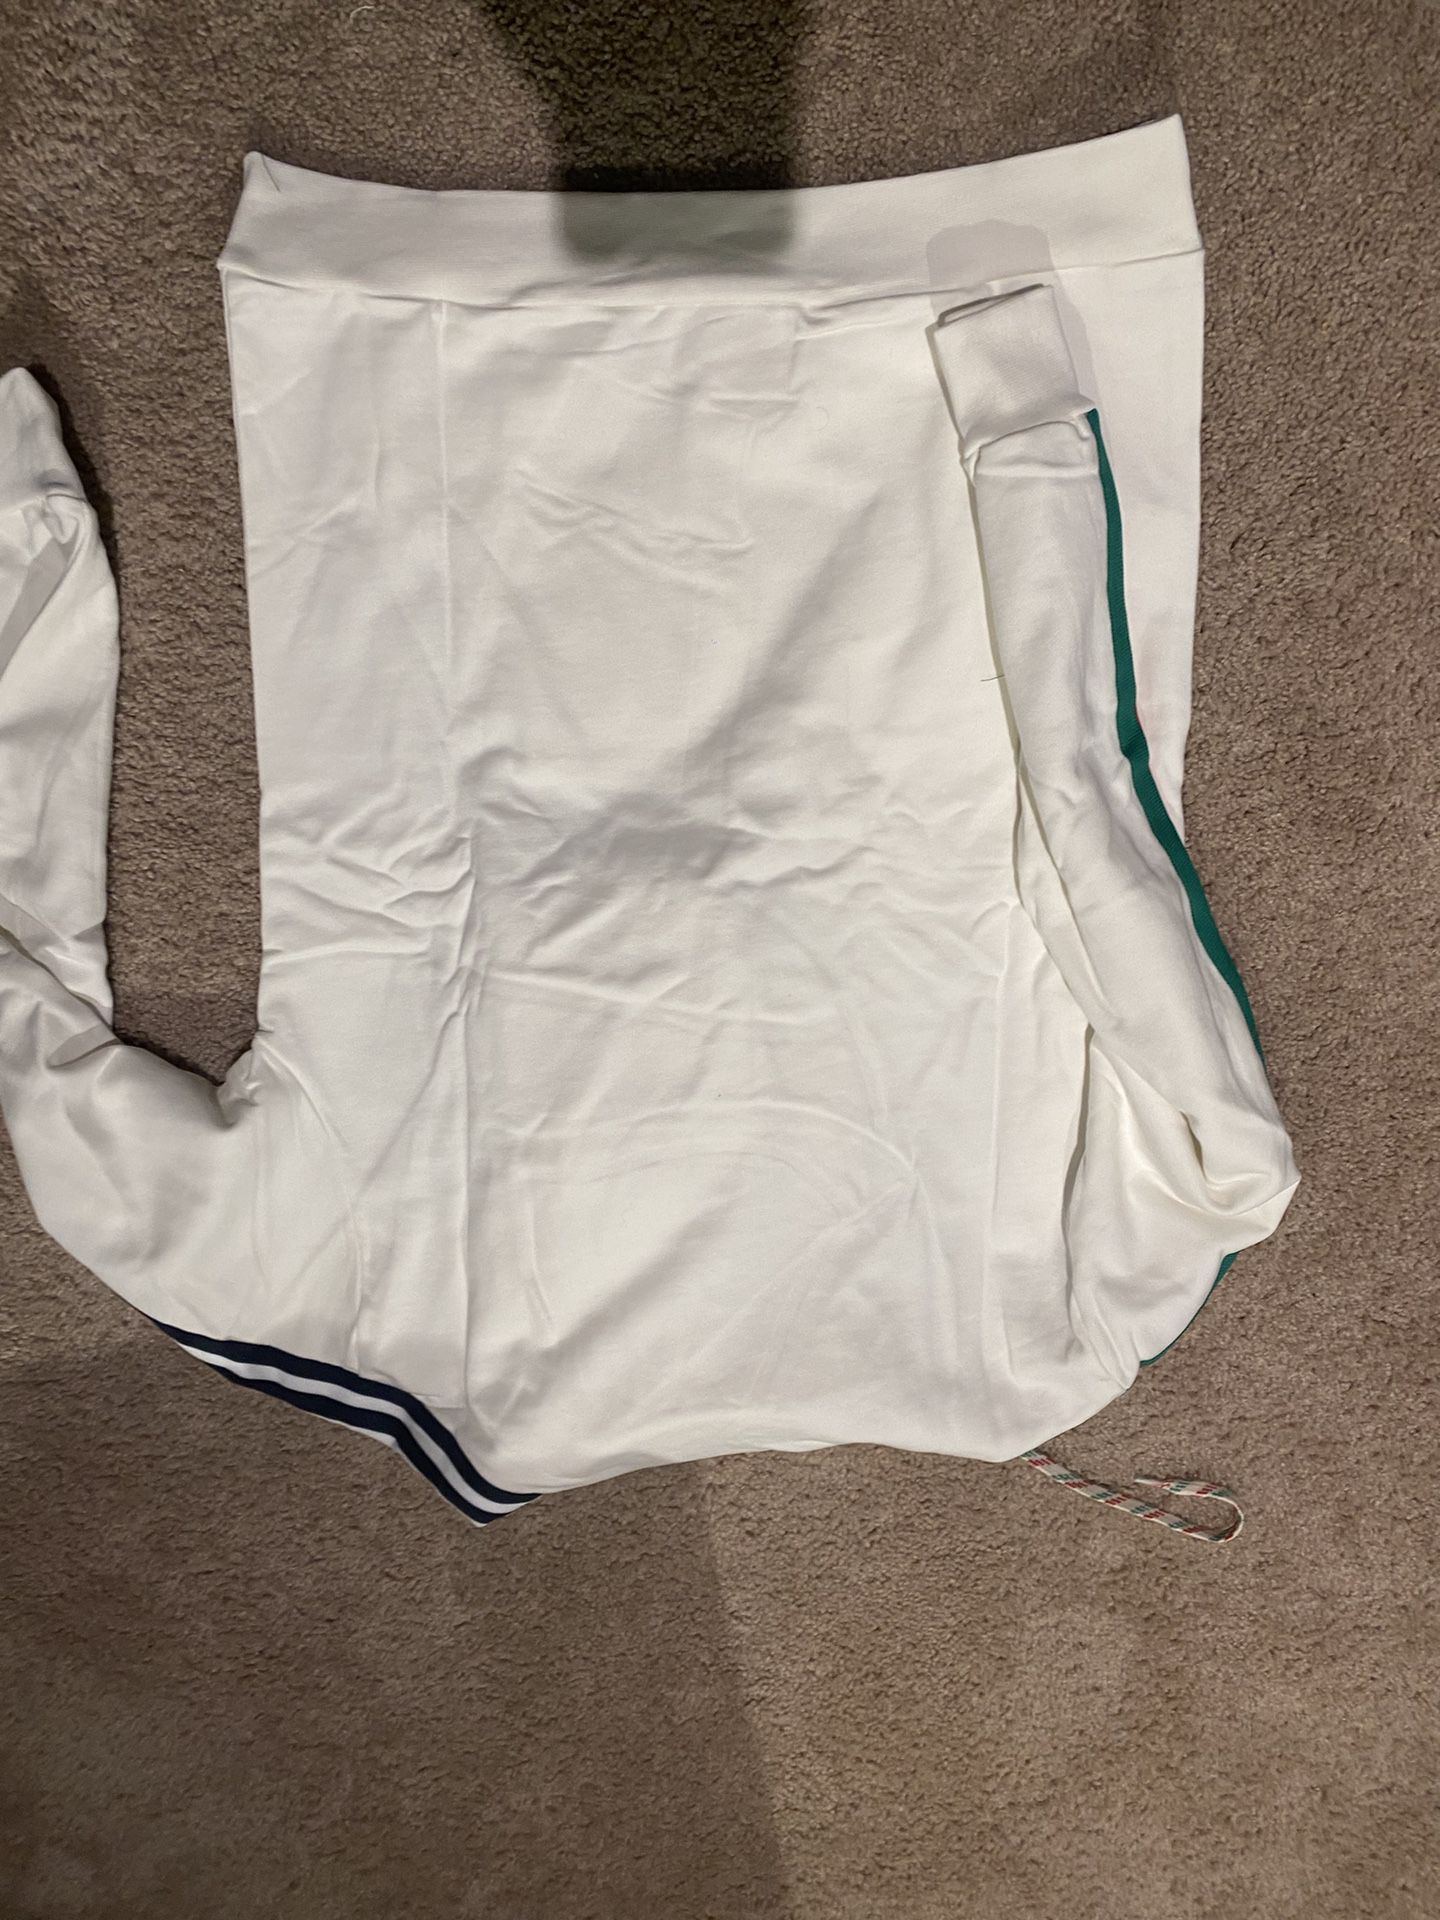 Brand New Gucci/adidas Collab Hoodie